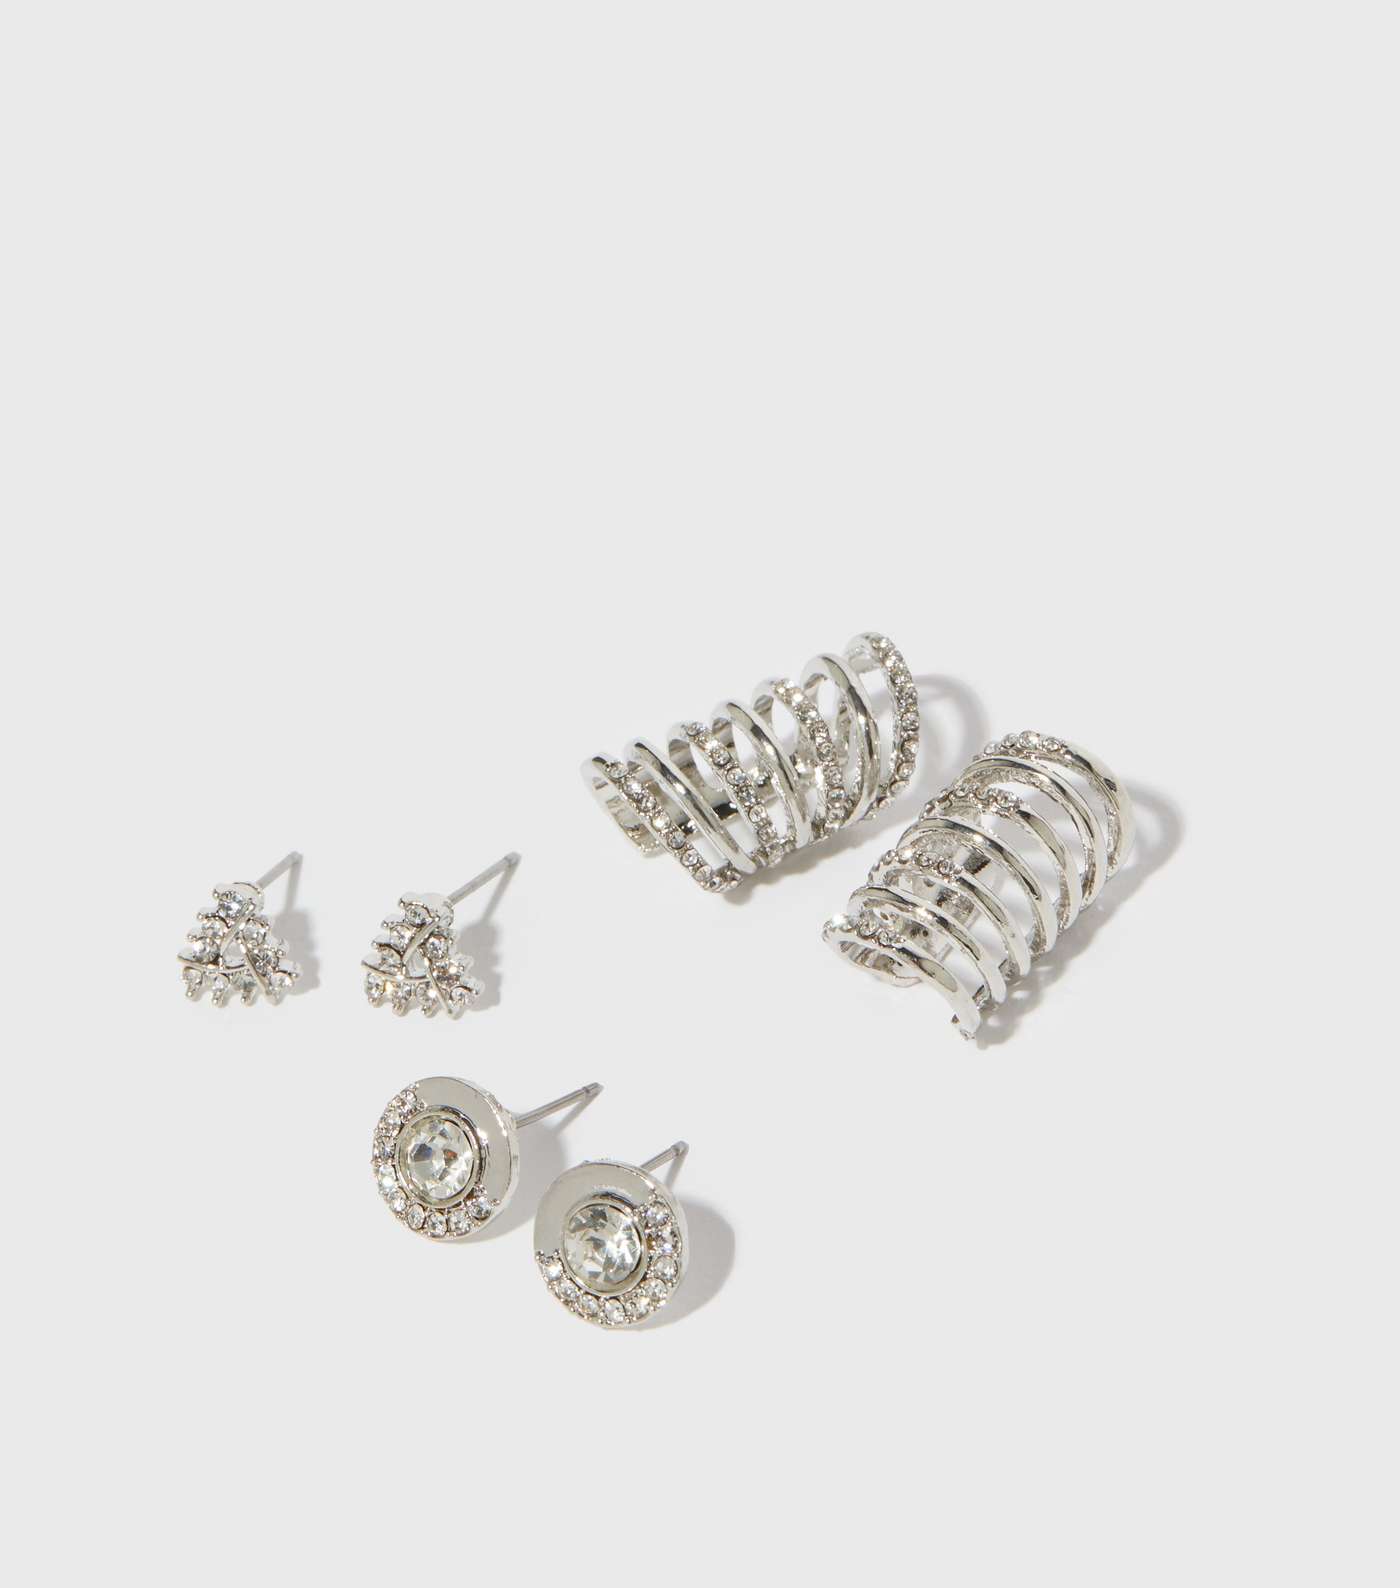 3 Pack Silver Mixed Ear Cuffs and Stud Earrings Image 2